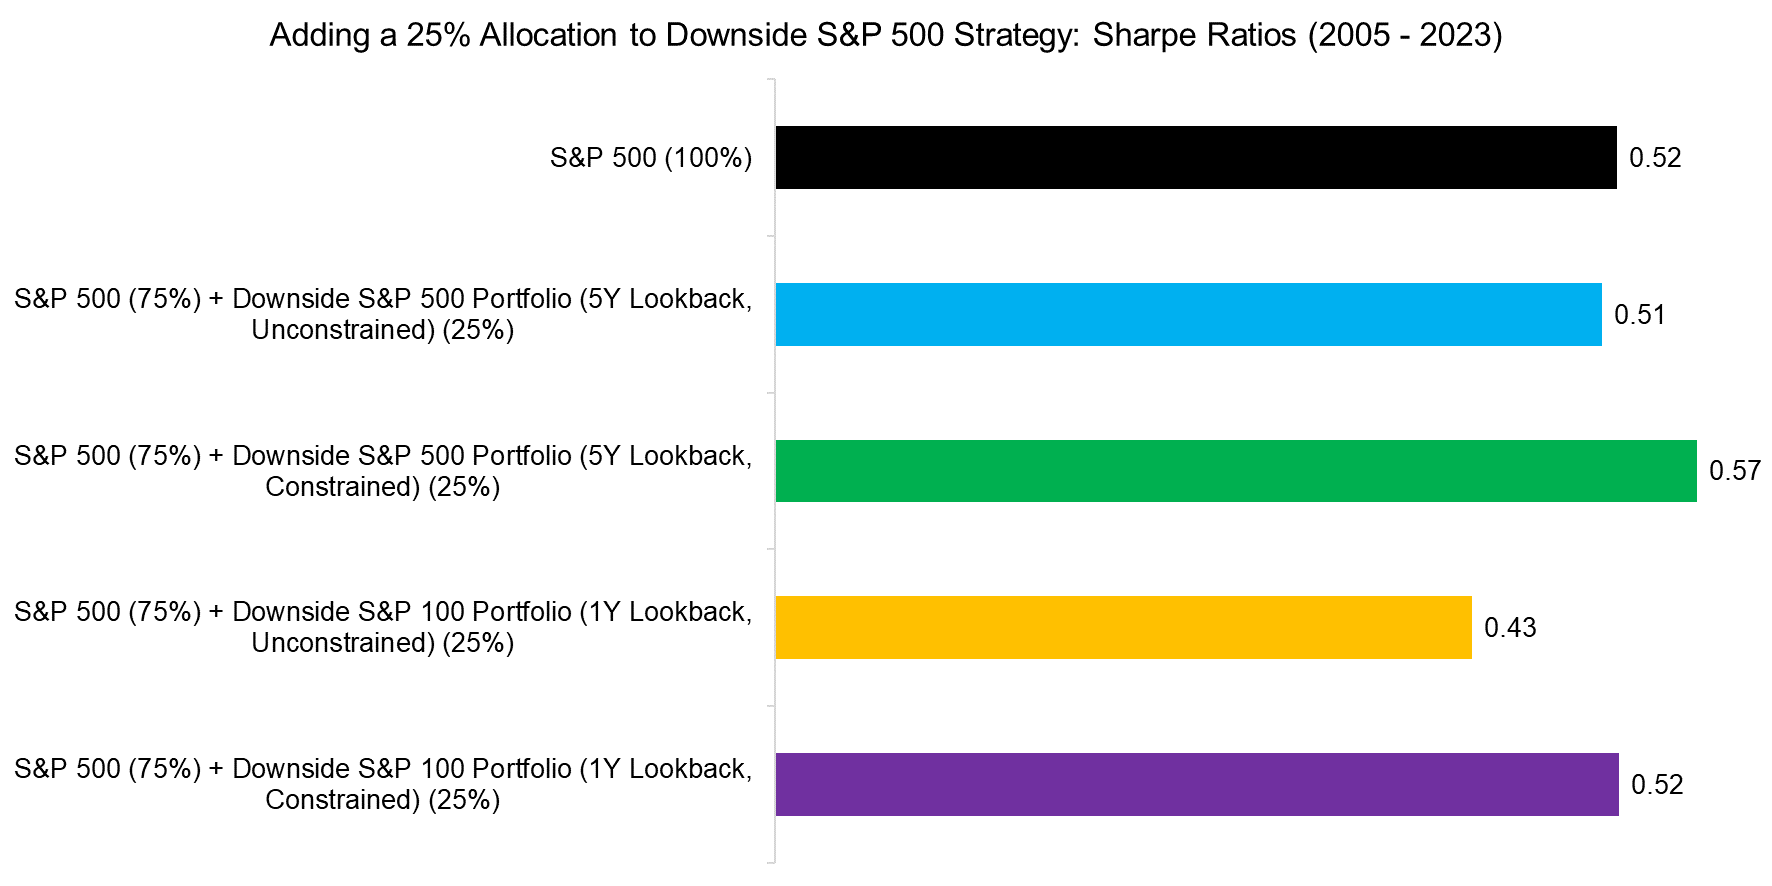 Adding a 25% Allocation to Downside S&P 500 Strategy Sharpe Ratios (2005 - 2023